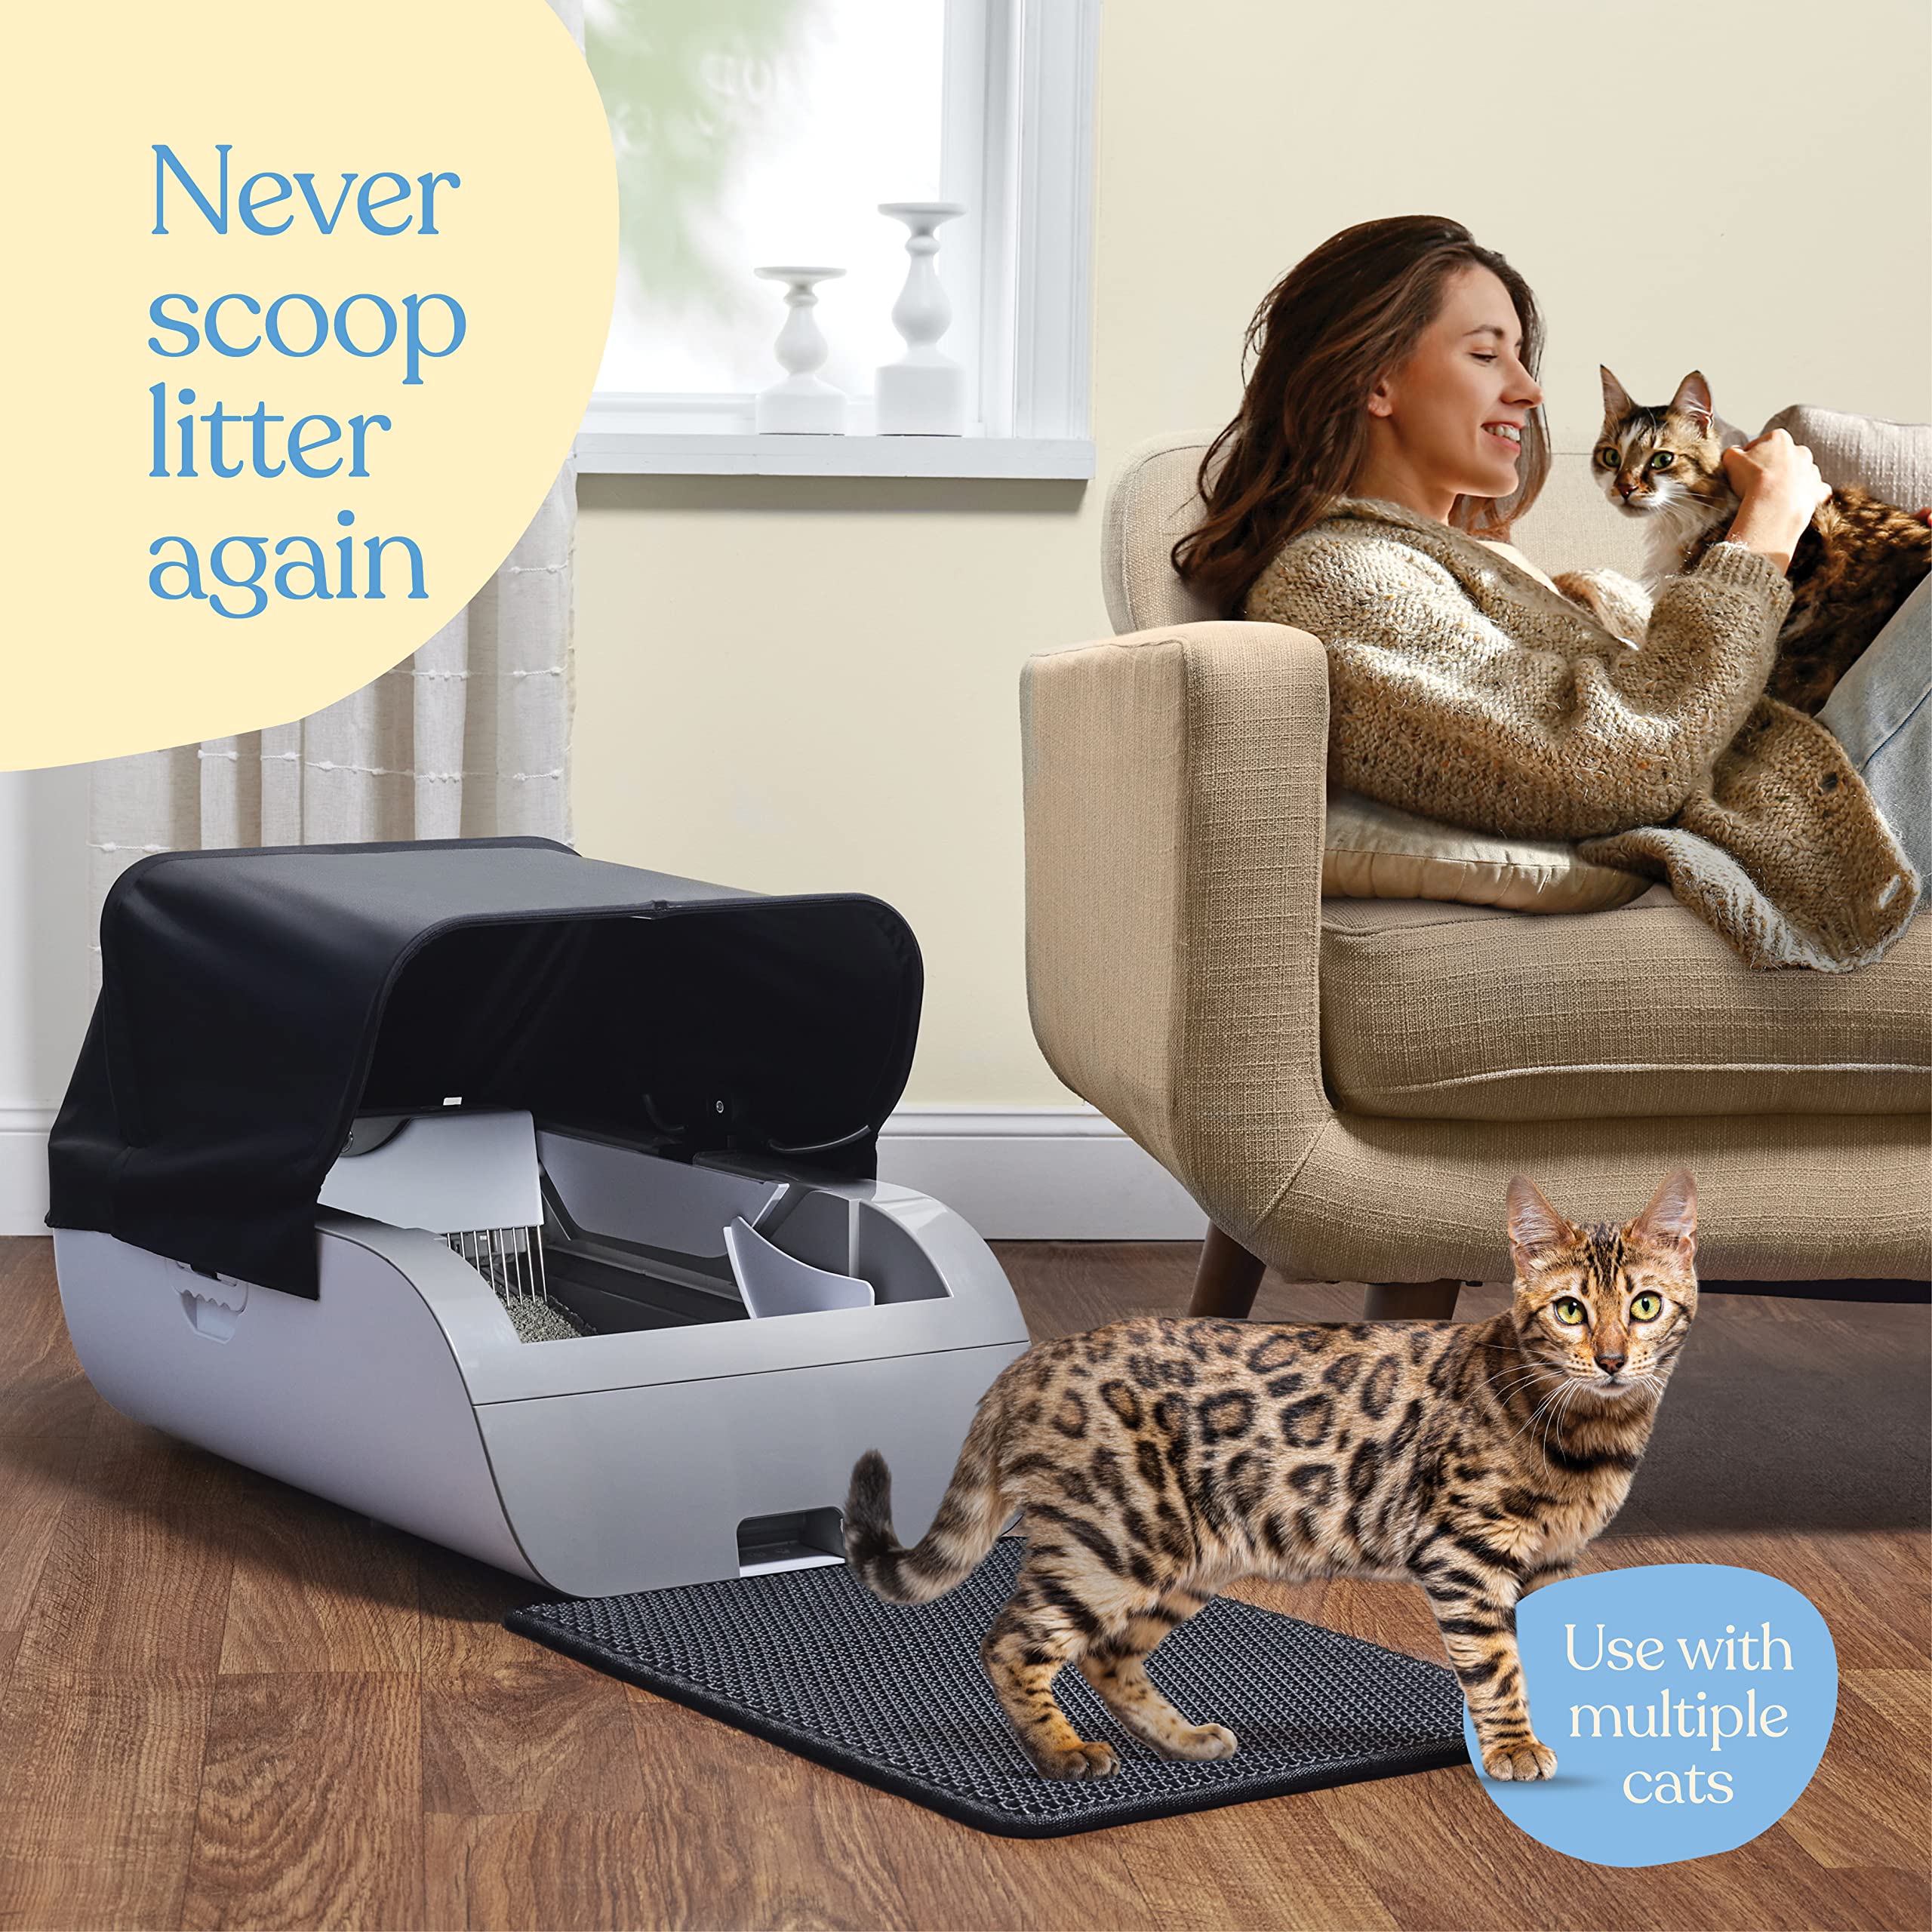 Smart Automatic Cat Litter Box - Self Cleaning Cat Litter Box with Built in Odor Eliminator -Works with Clumping Cat Litter (No Expensive Refills) Large Cat Litter Box with Hood & Litter Mat.  - Acceptable